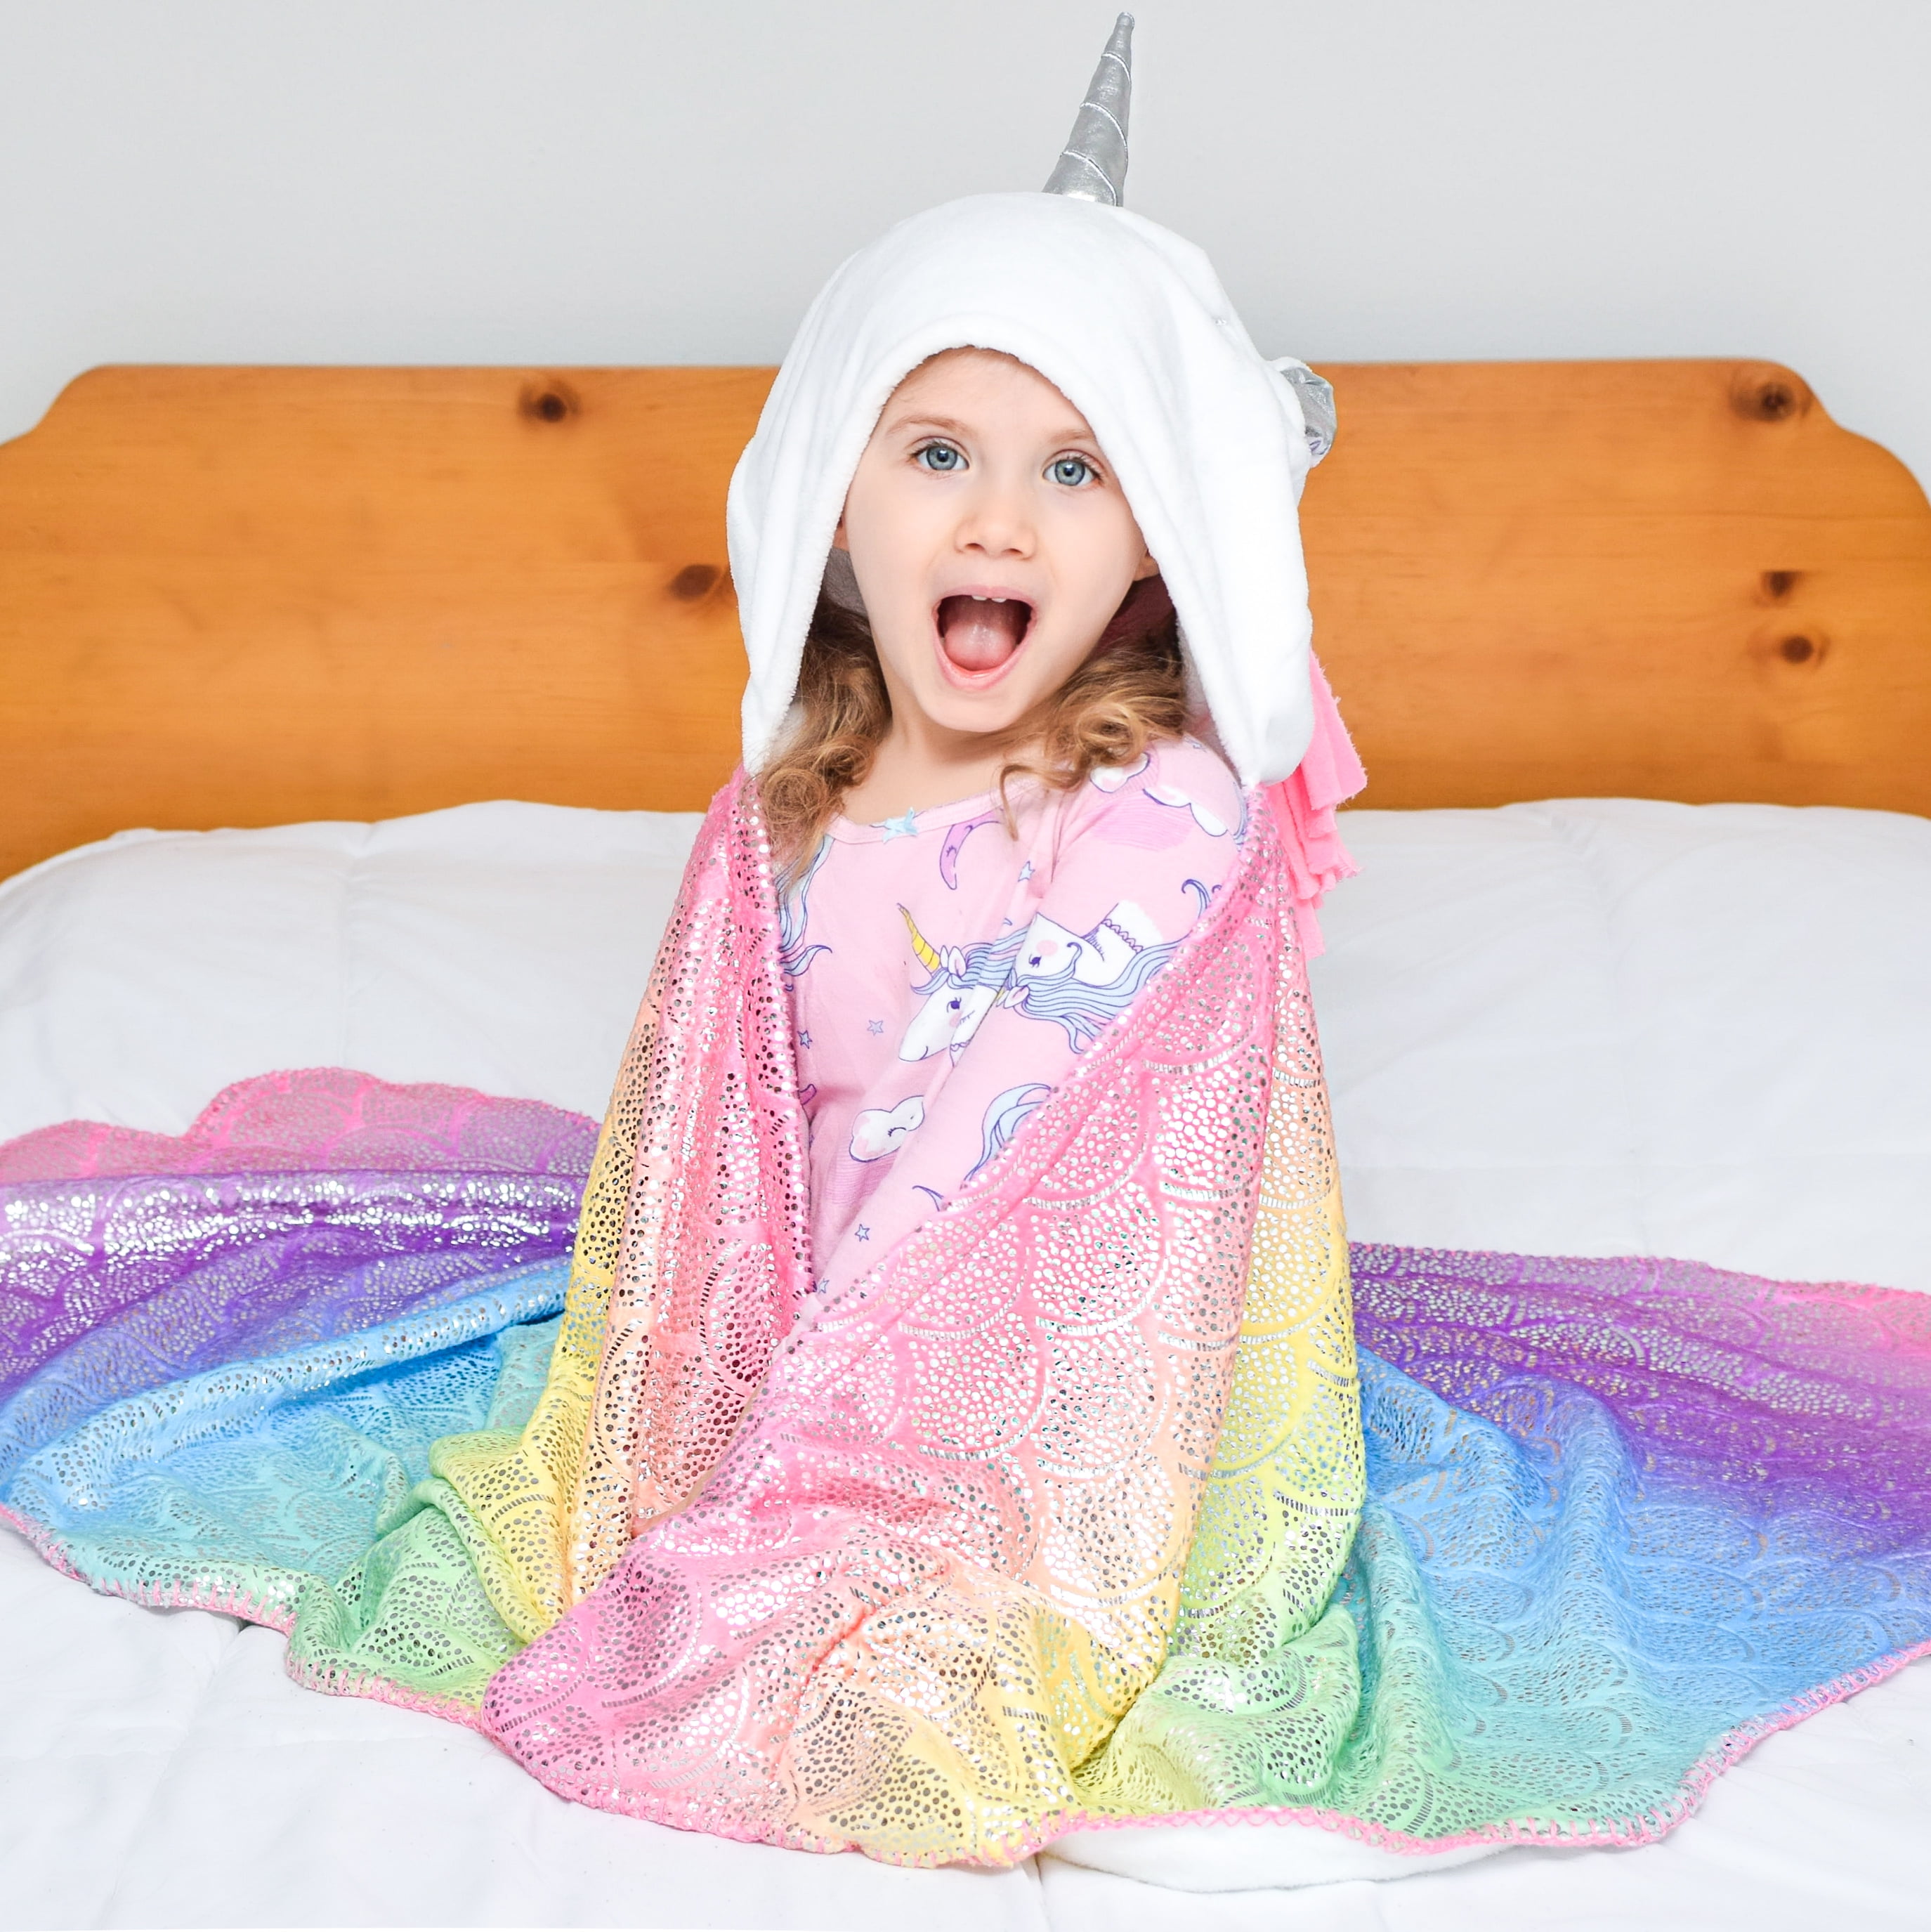 Throw Blankets Wrap with Hood Great Present for Toddlers Children Teens and Young Girls FamFun Baby Unicorn Blanket for Kids Super Soft Comfy Large Comforter 50 x 60 